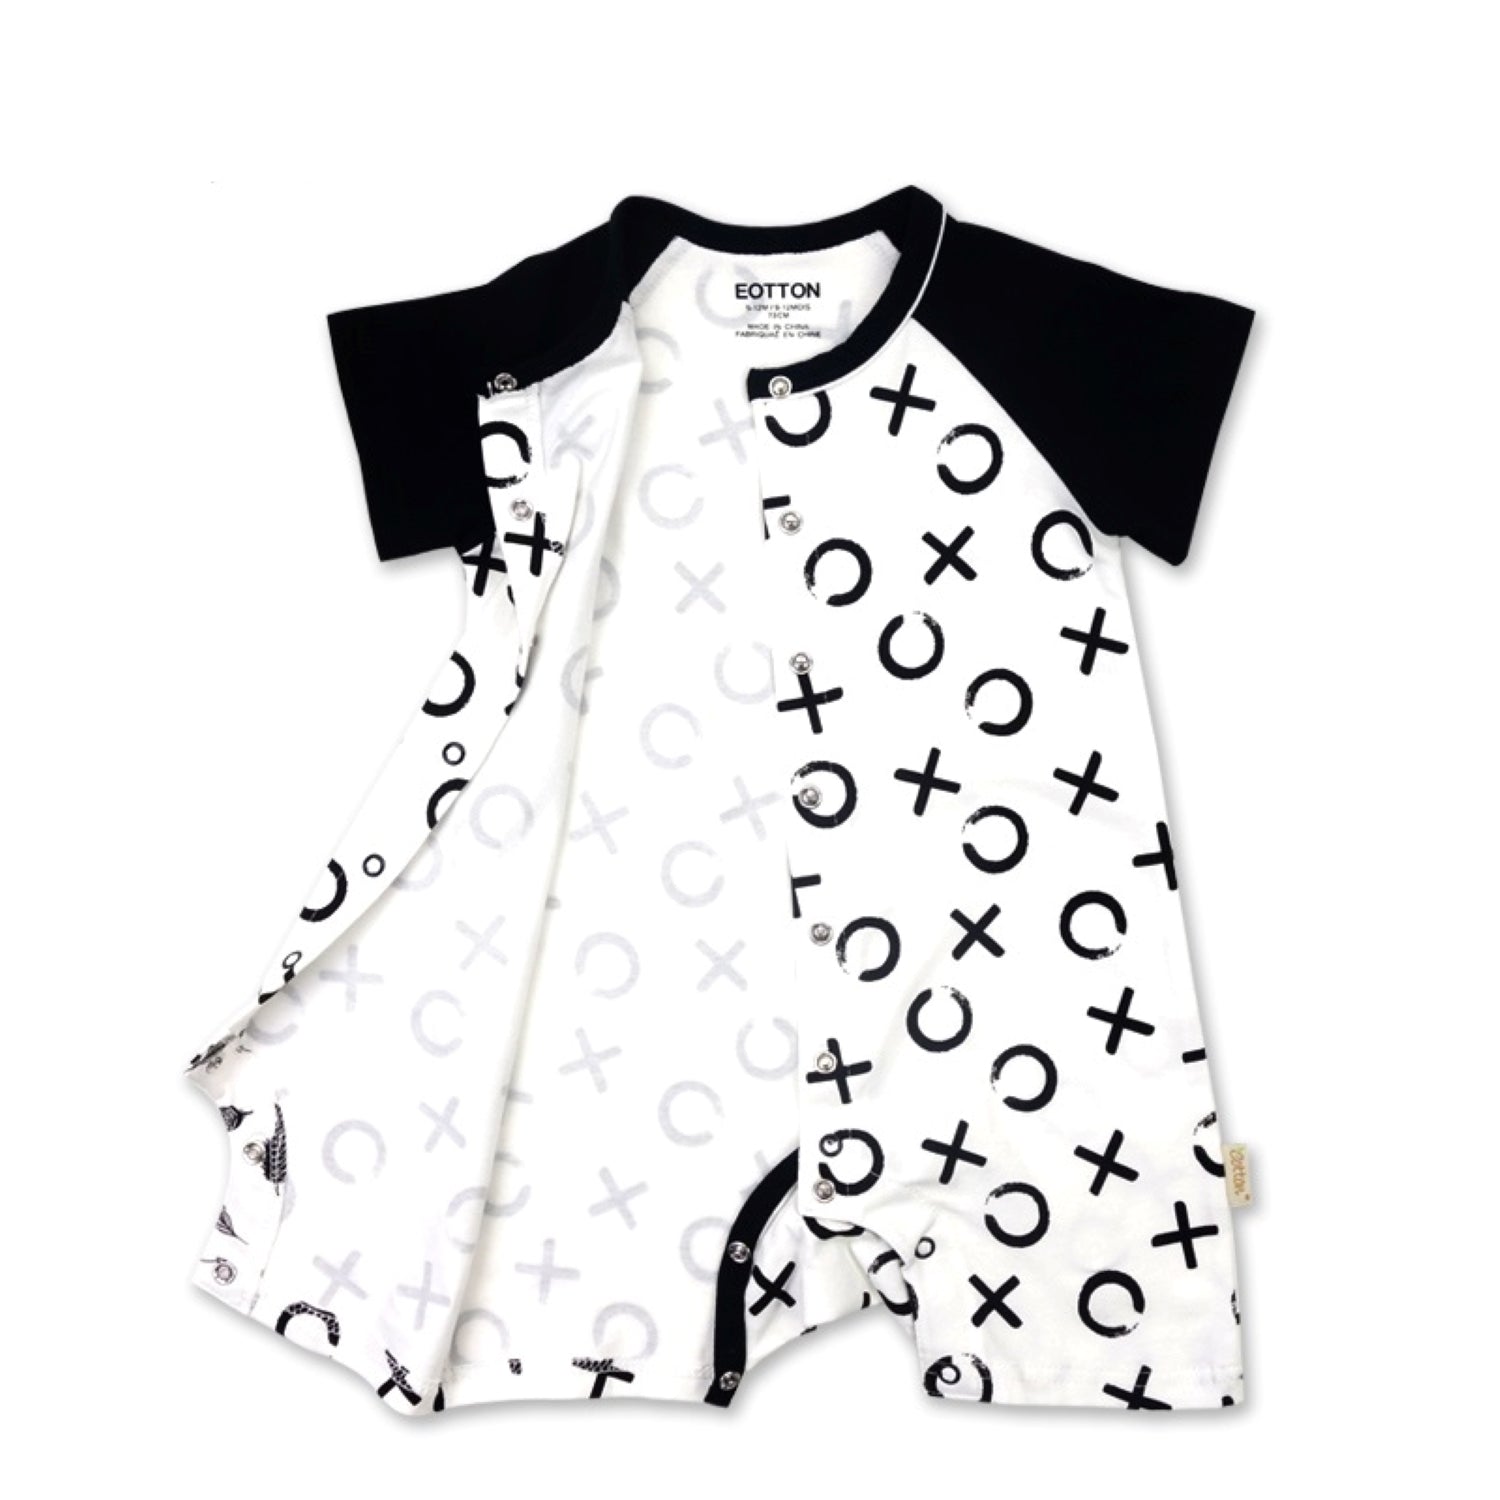 Gender Neutral Infant Clothes: Organic Short Sleeve Baby Romper - Black & White Theme - Eotton Canada